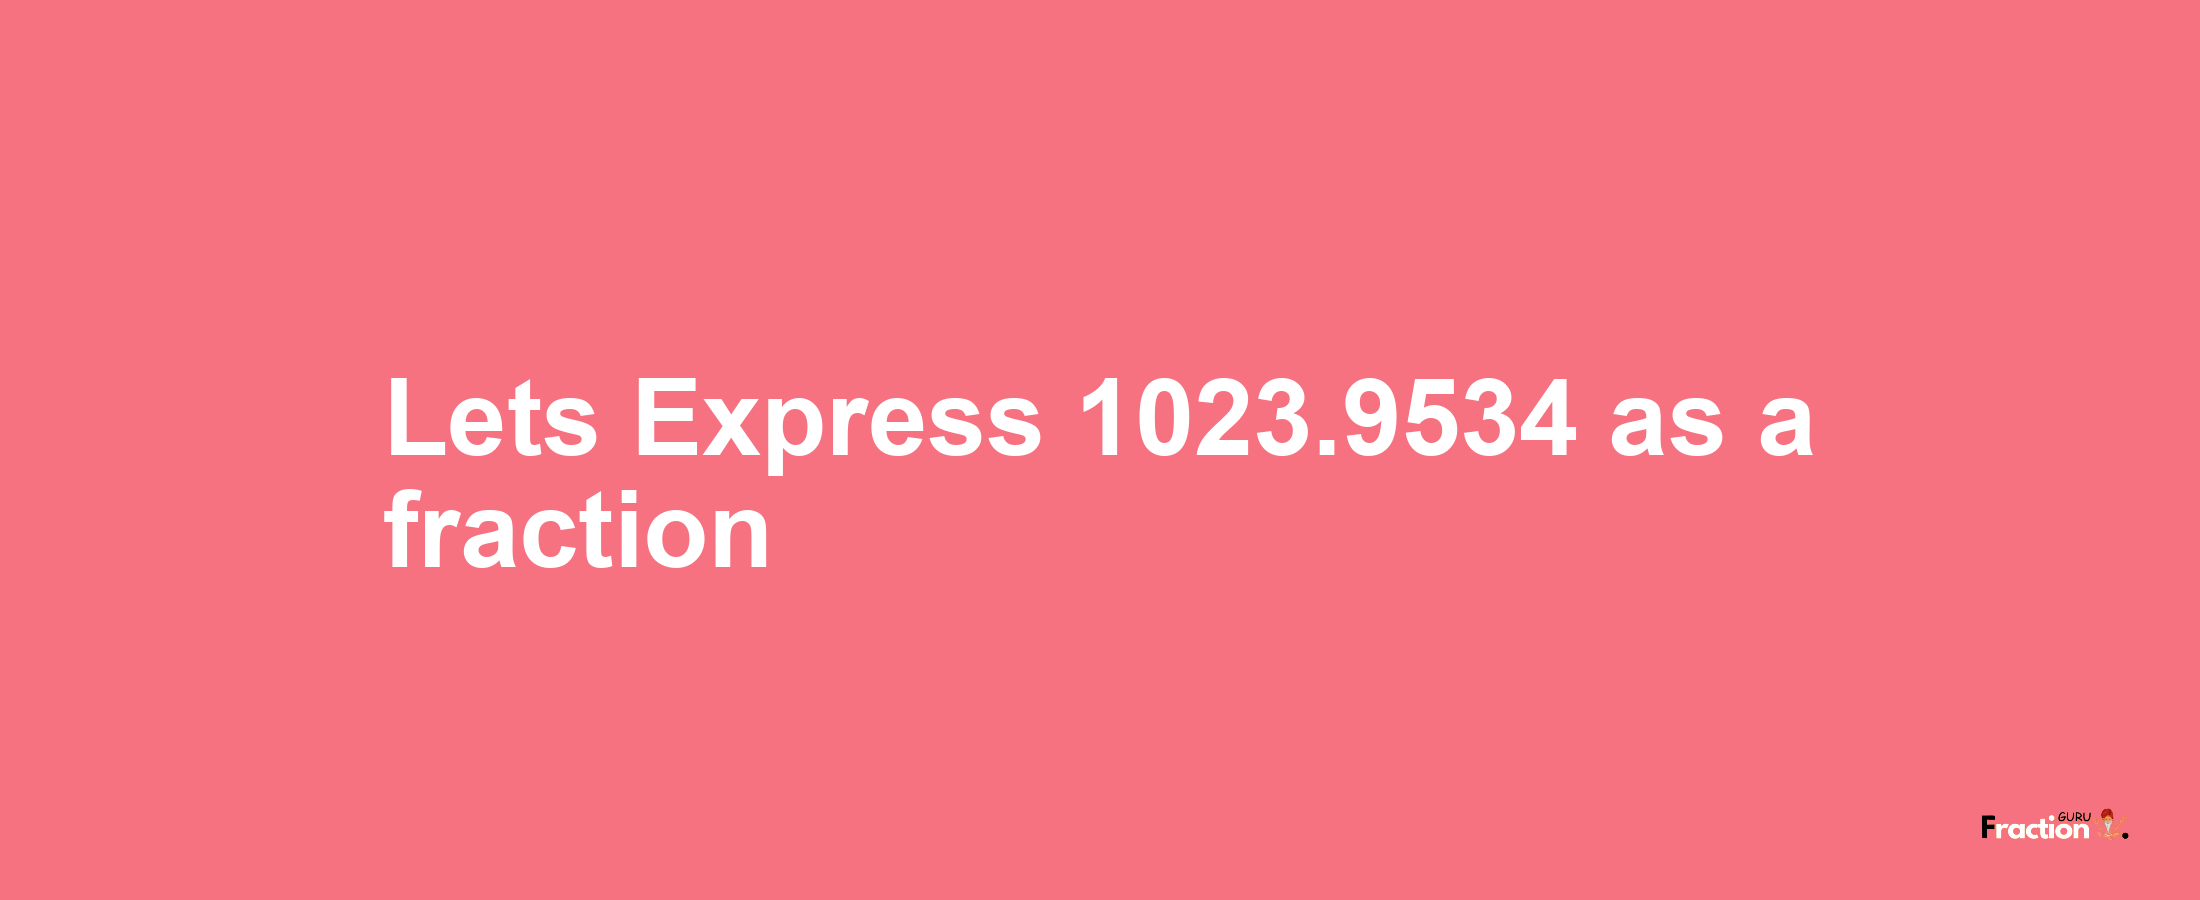 Lets Express 1023.9534 as afraction